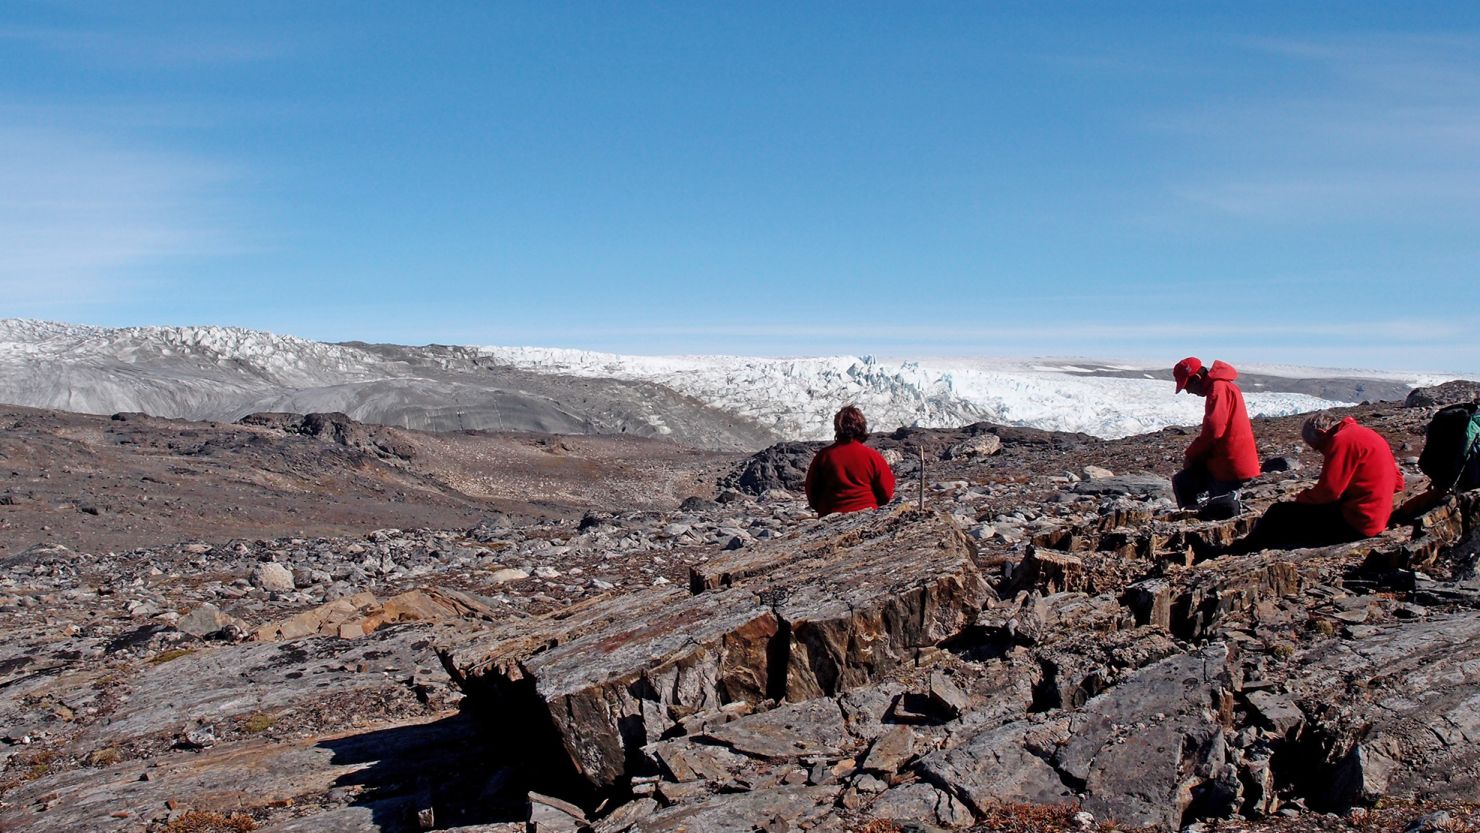 The Isua area of Greenland has yielded fossils that are billions of years old.